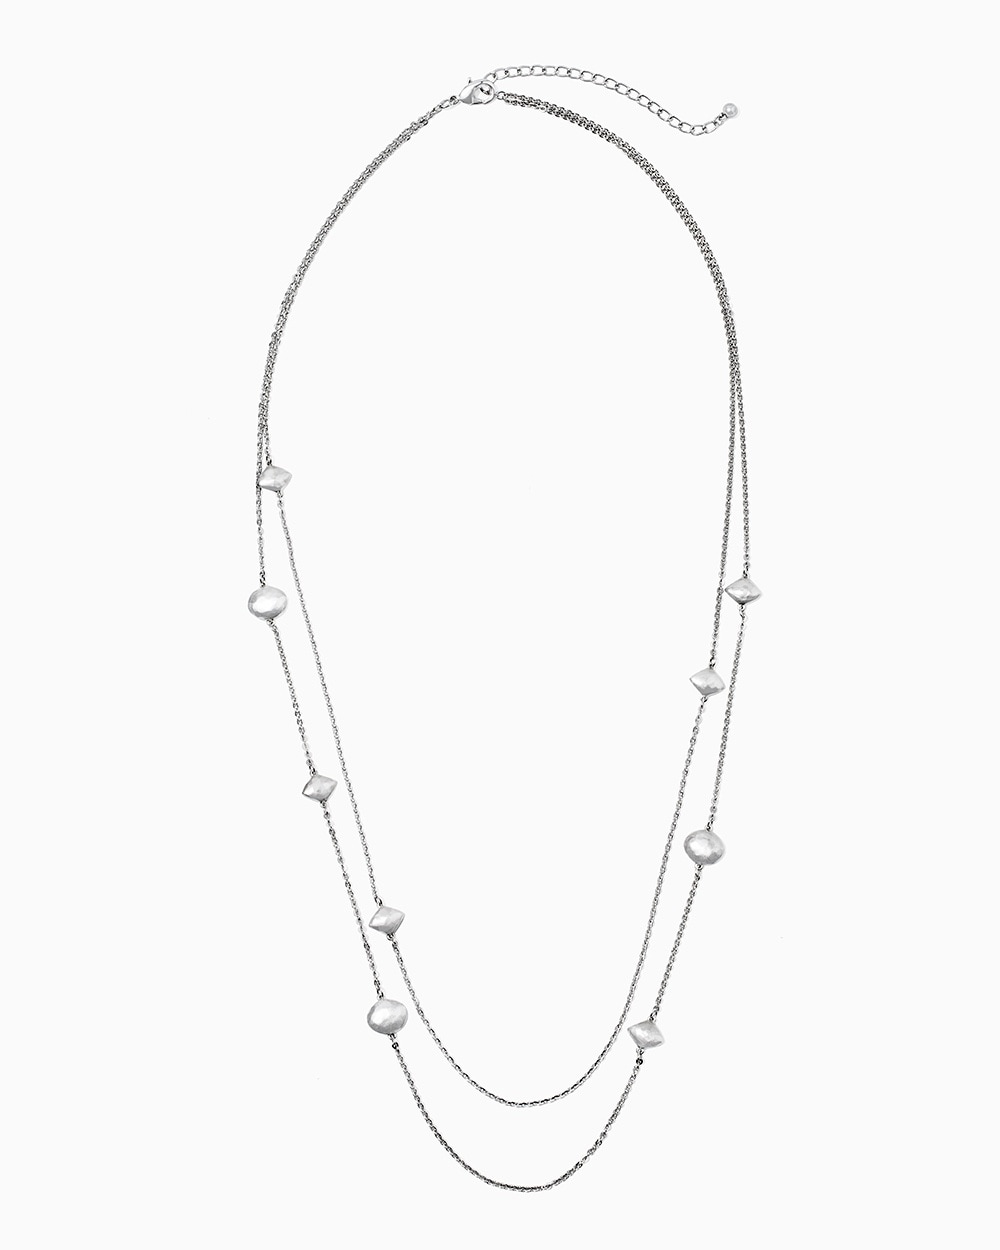 Silver Tone Double-Strand Necklace